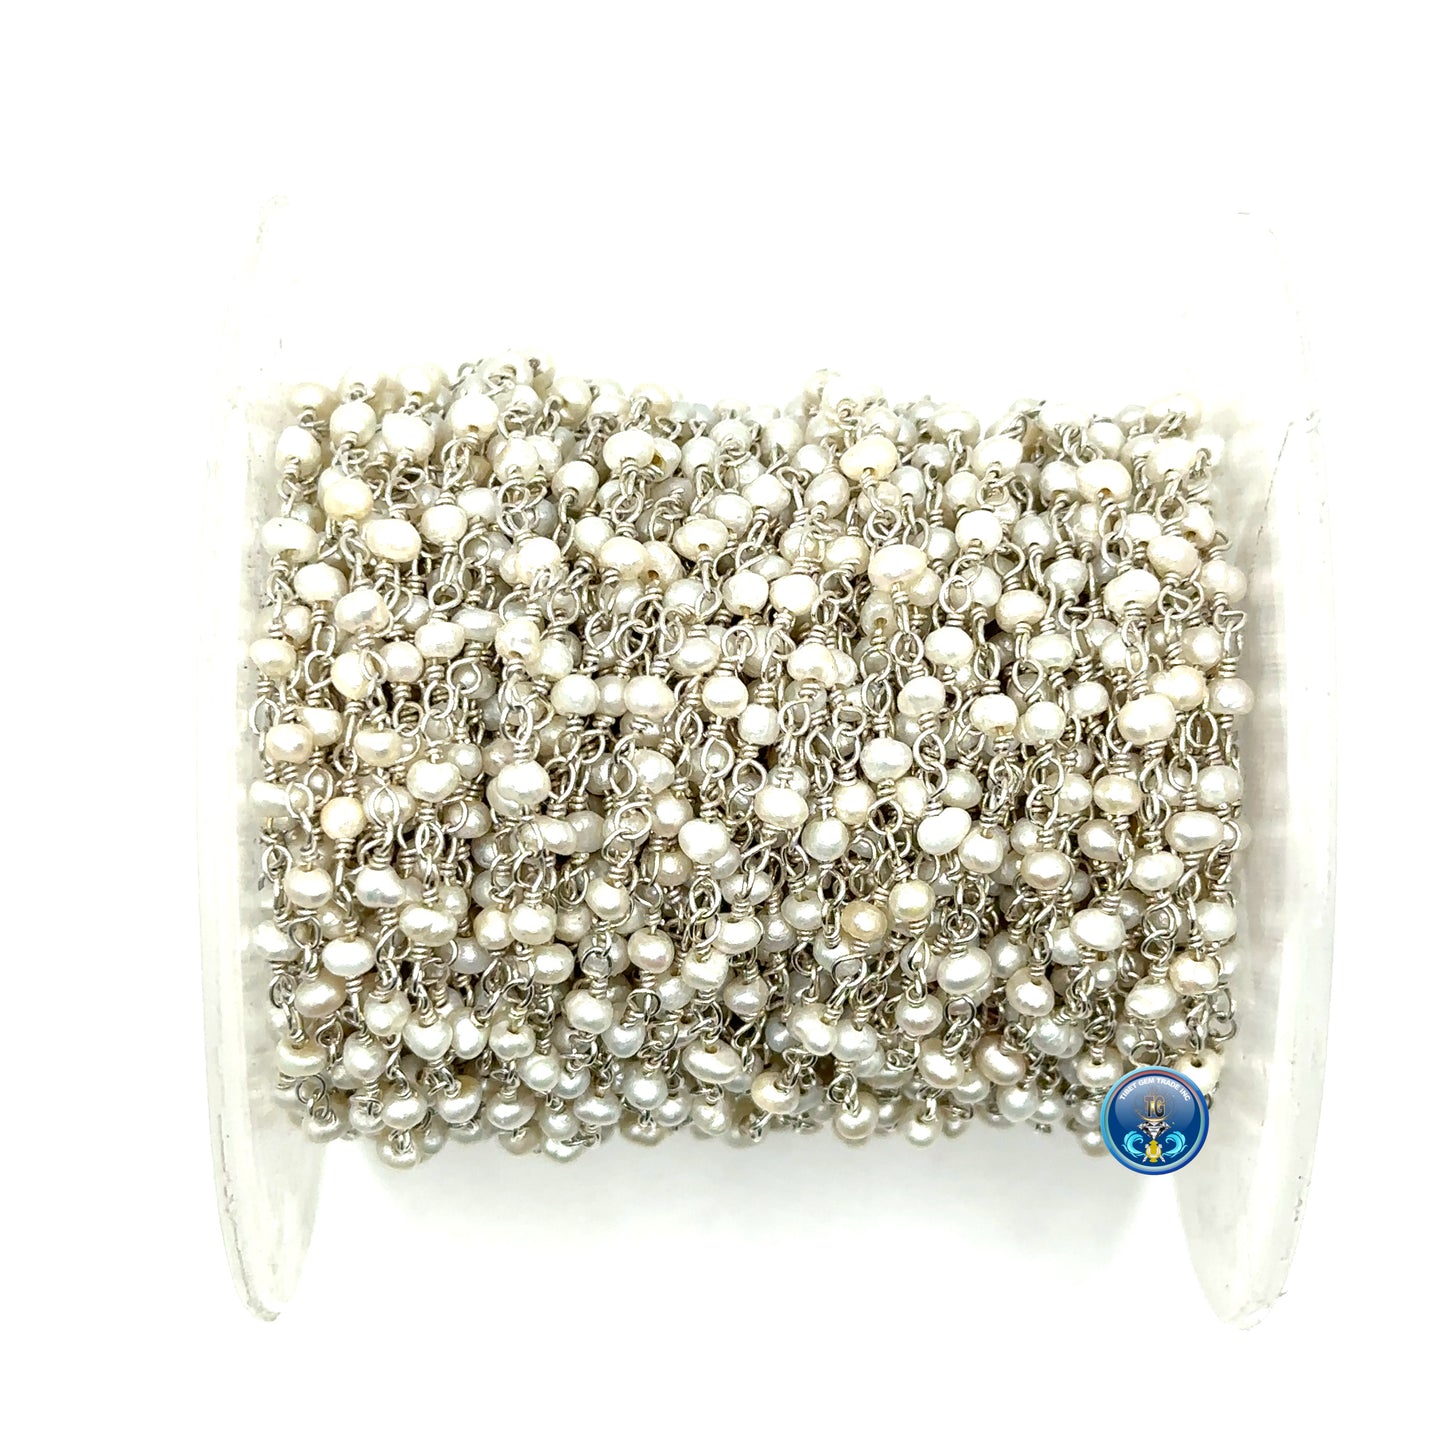 Freshwater pearl 3mm